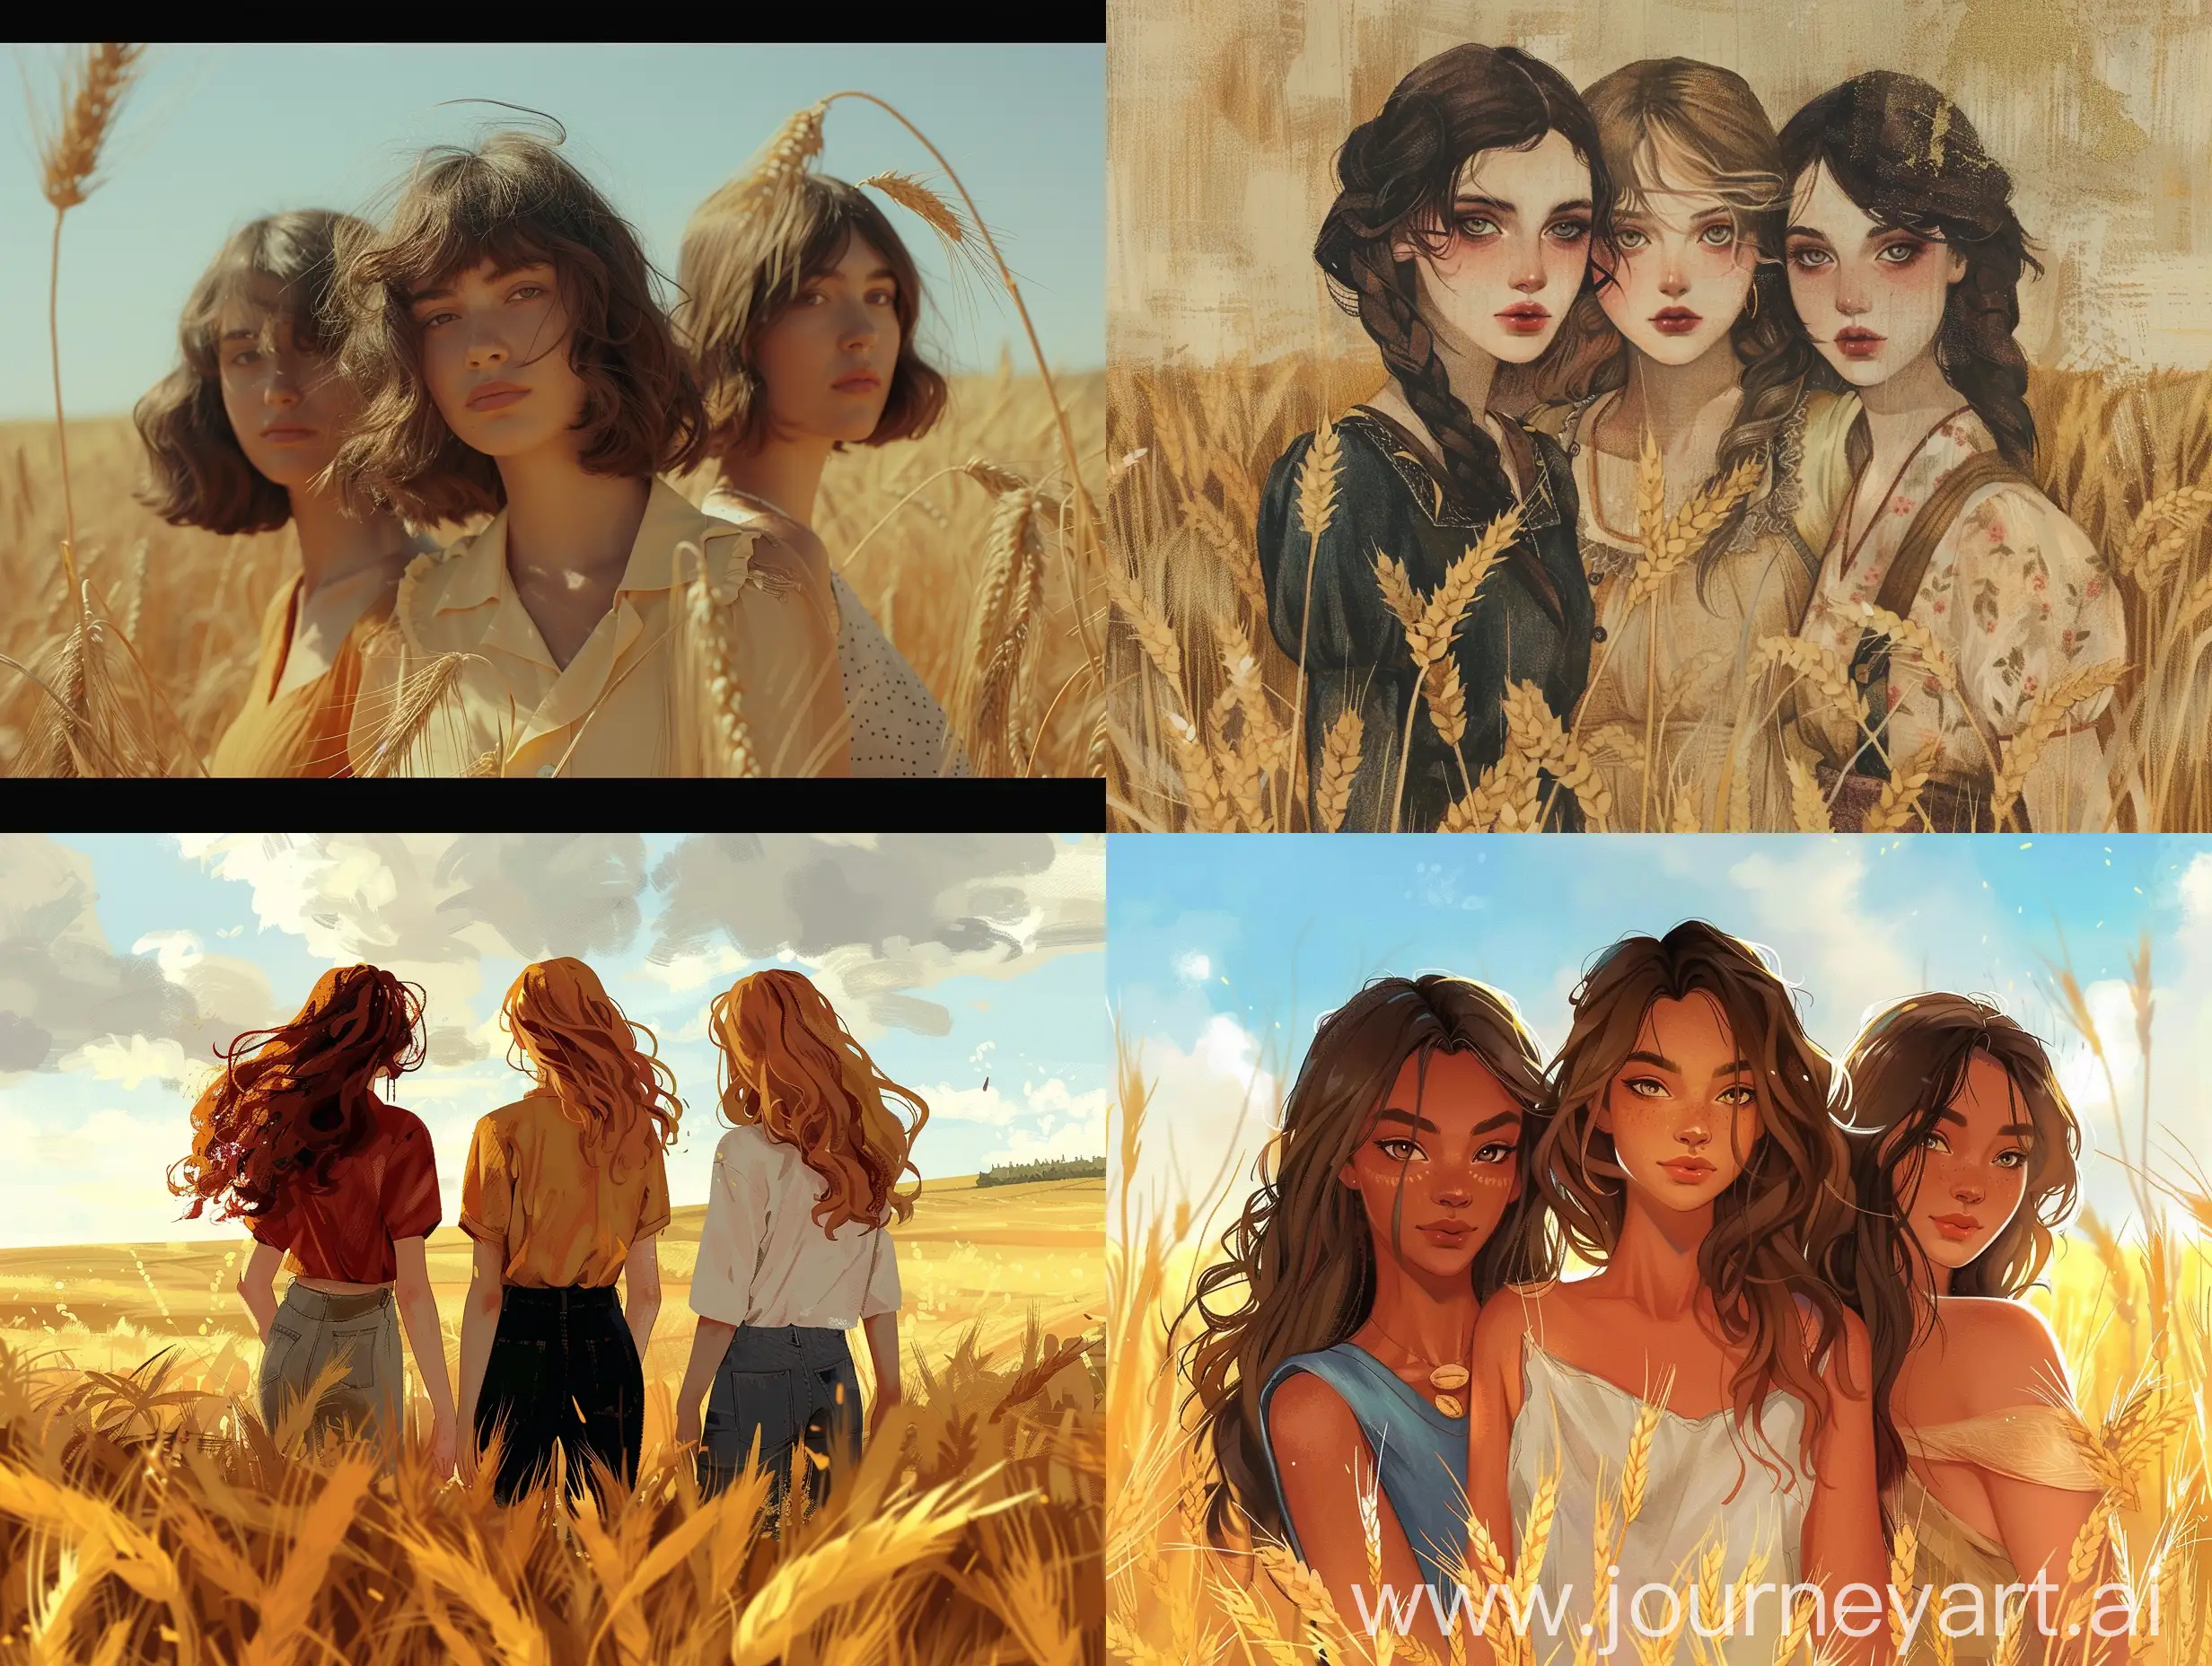 Three girls in a wheat field, one of them has waist-length styled hair, one of them has straight neck-length hair, and the other has shoulder-length styled hair.